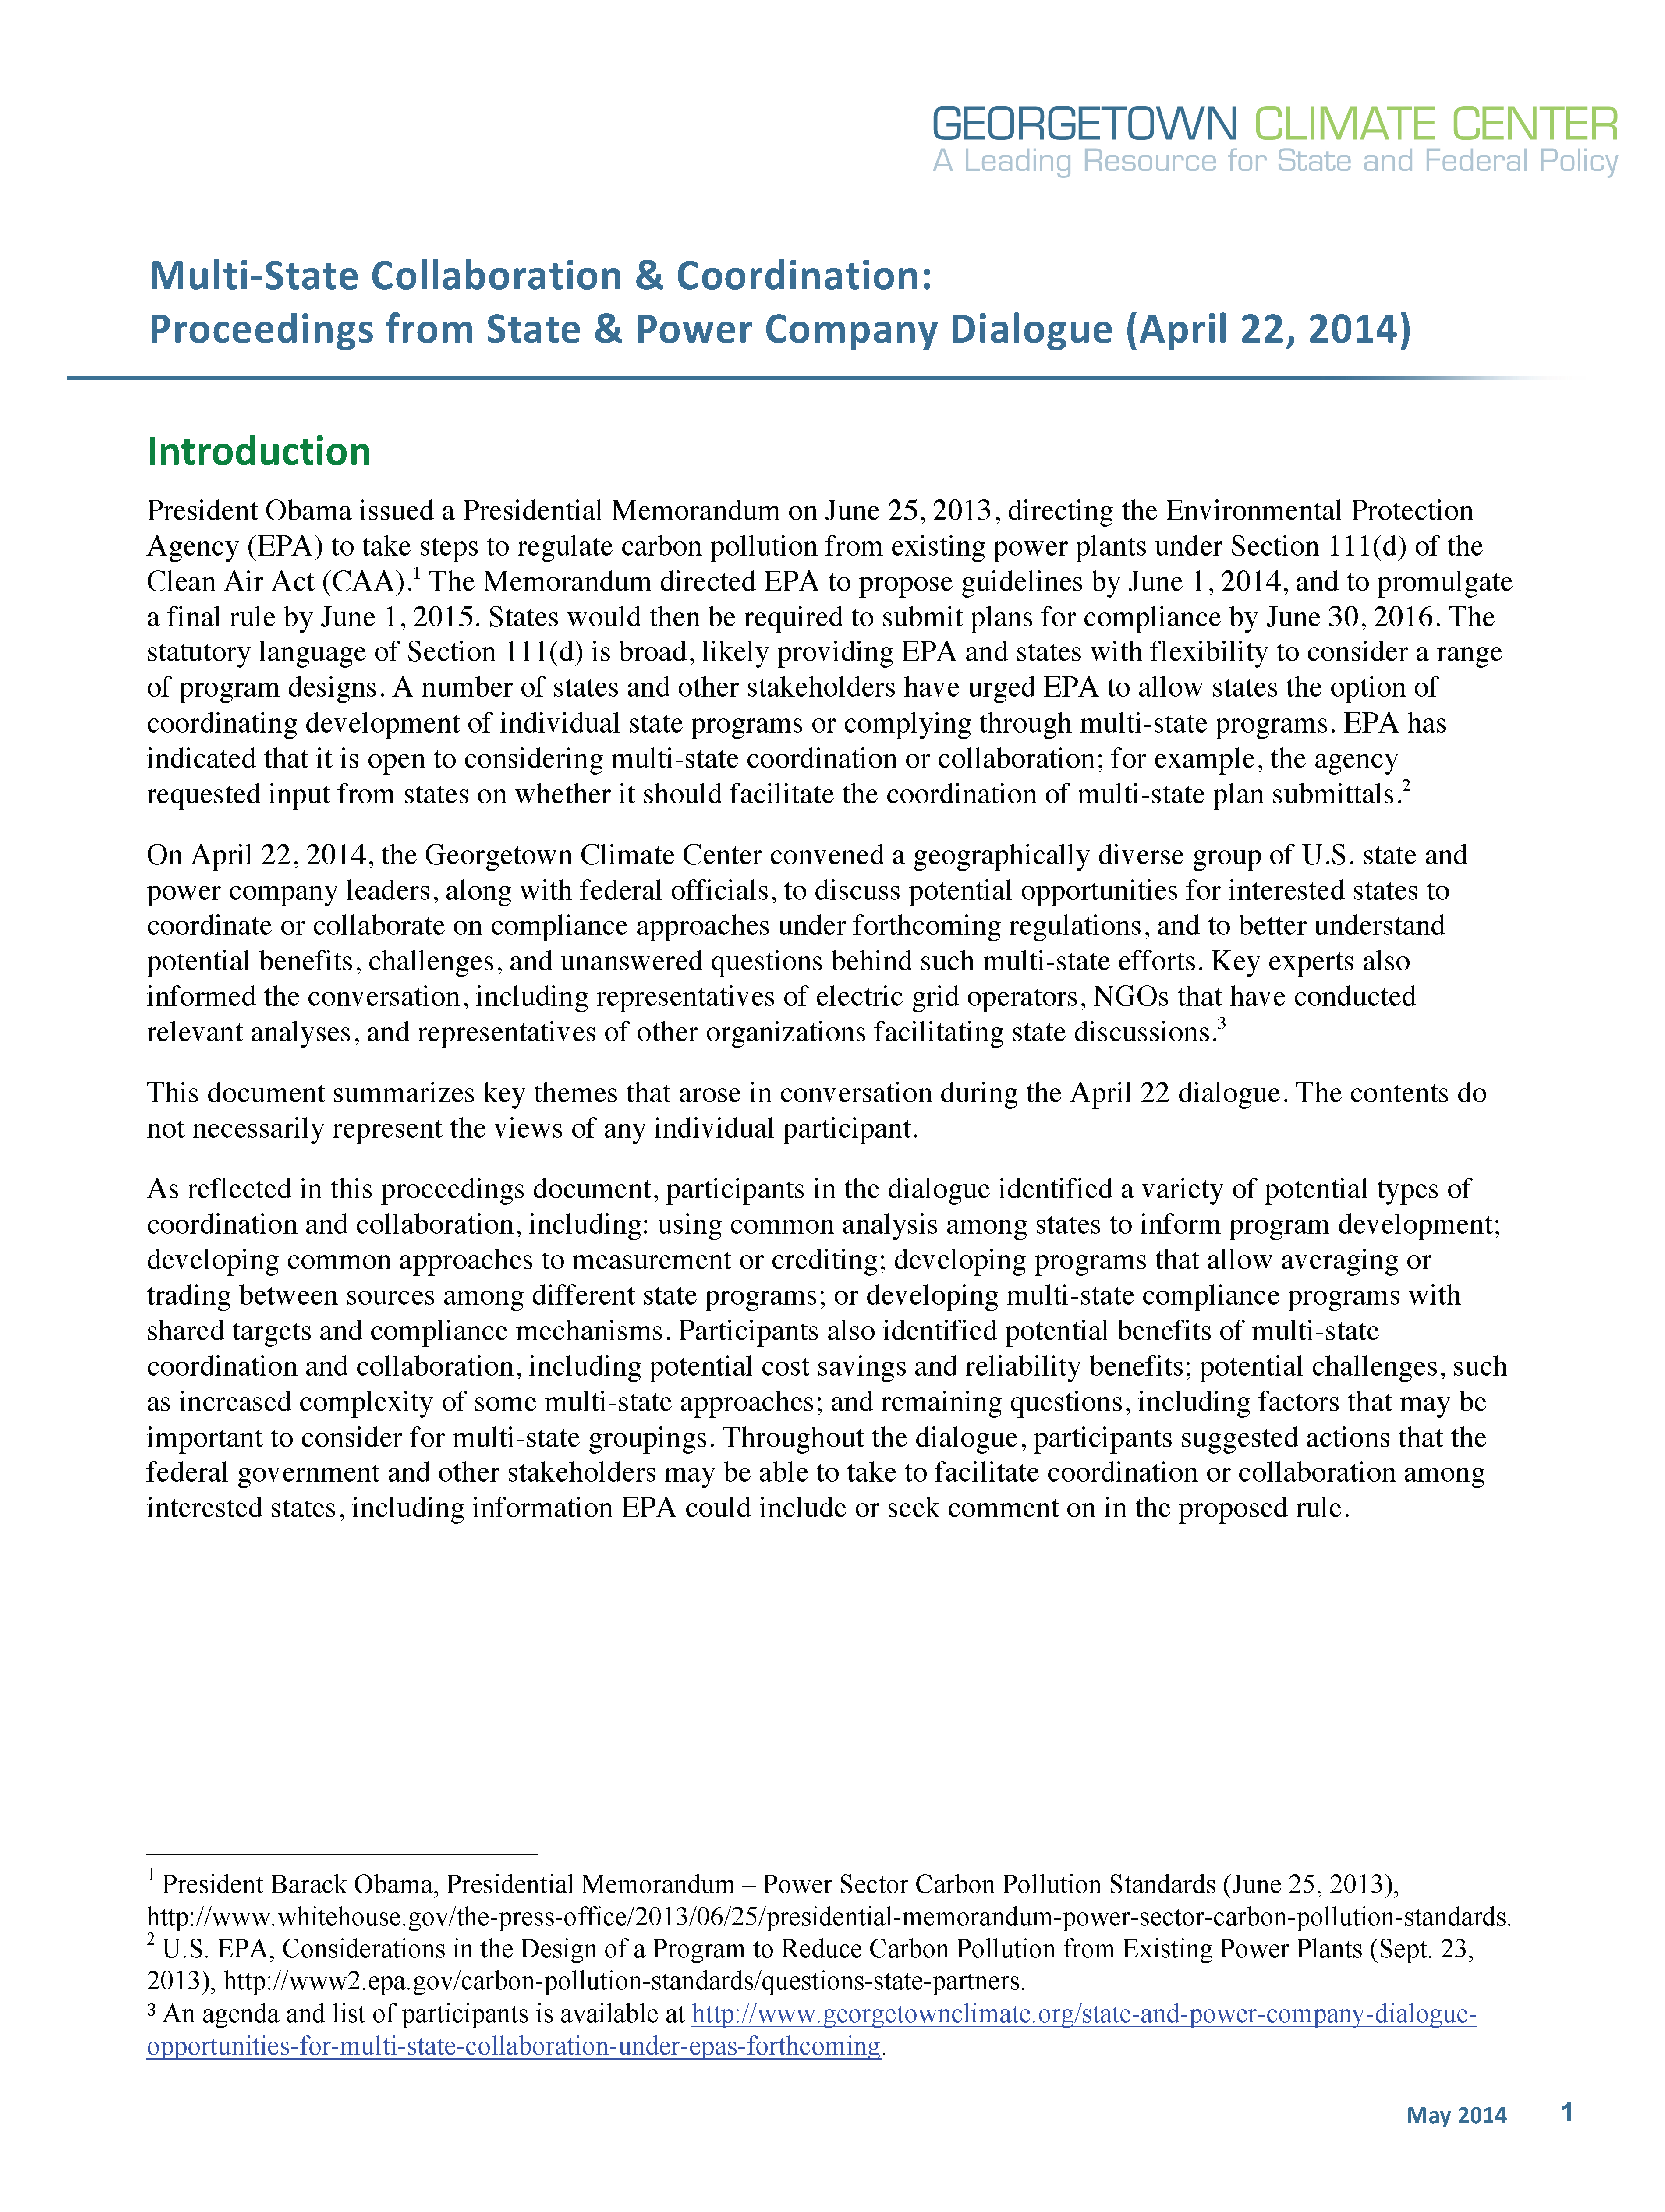 Multi-State Collaboration & Coordination: Proceedings from State & Power Company Dialogue (April 22, 2014)